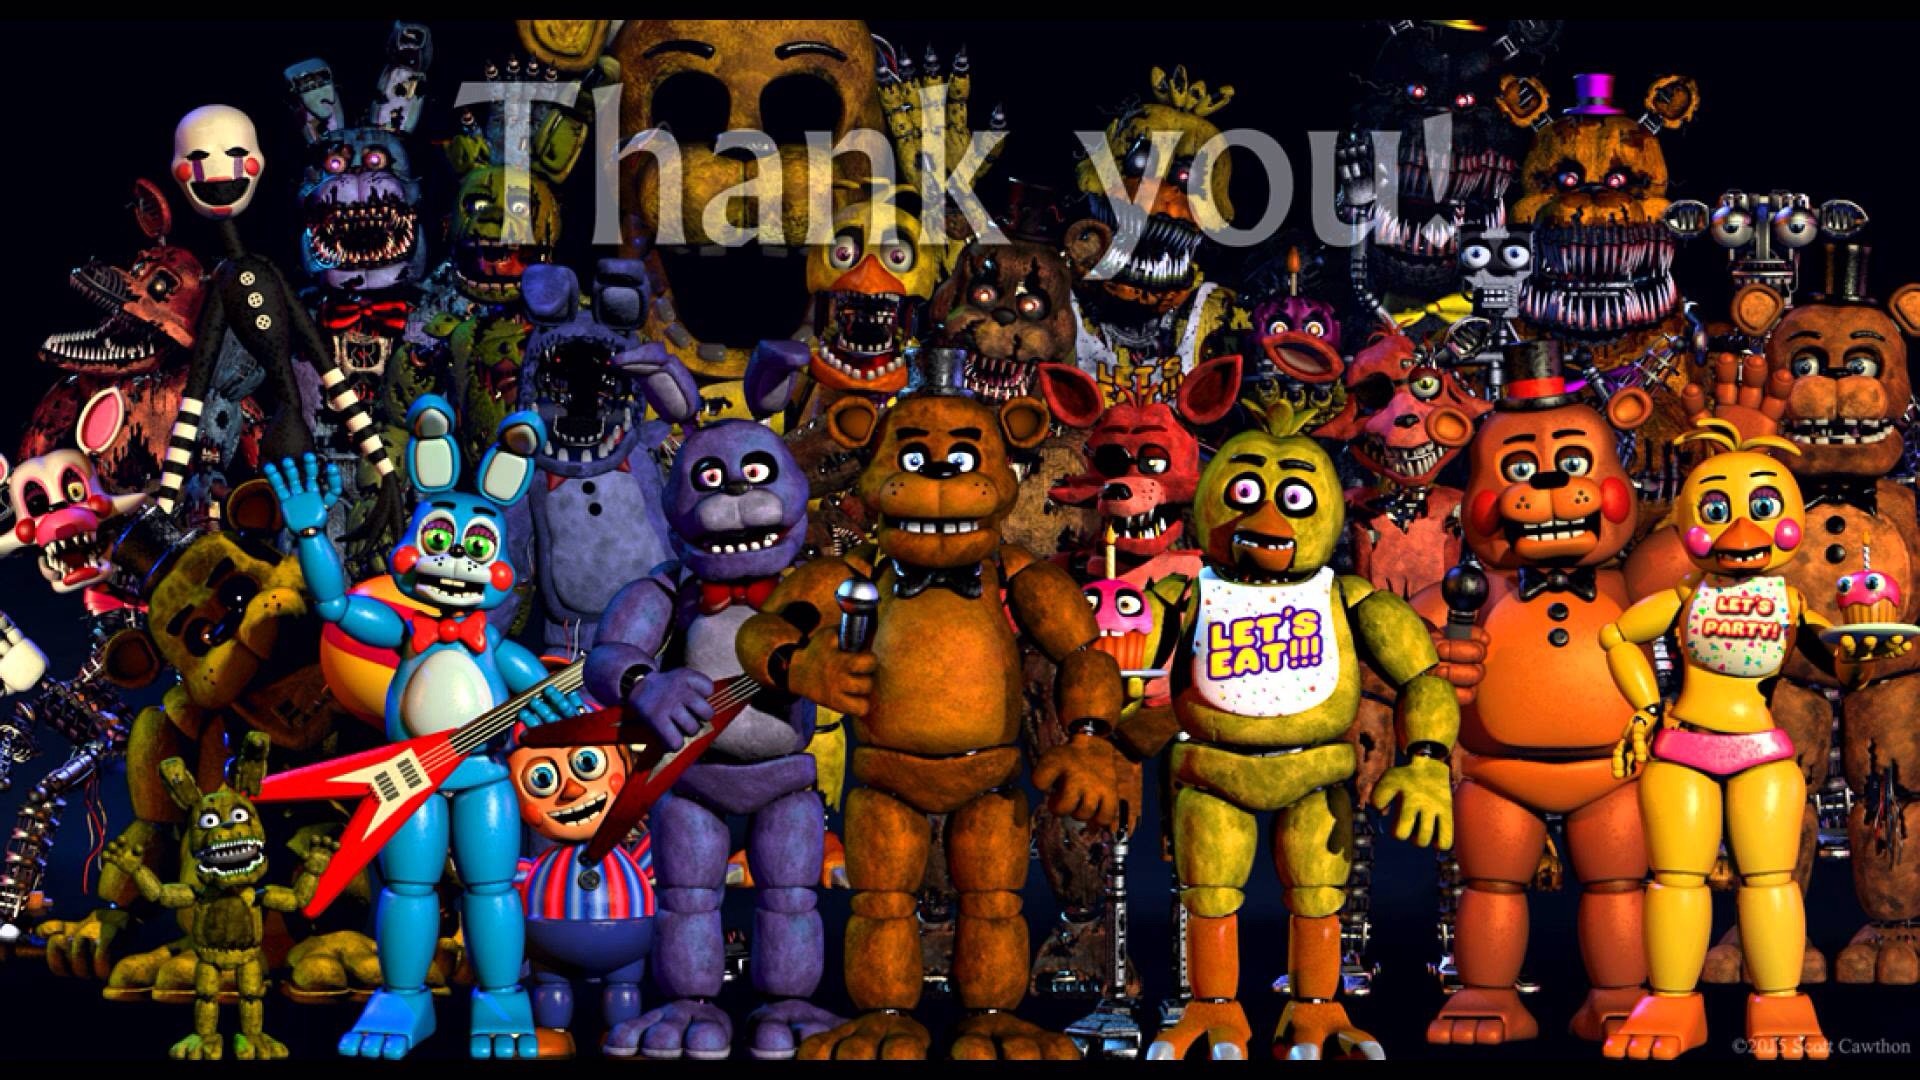 In early August, Scott put up a Thank you Image on his website